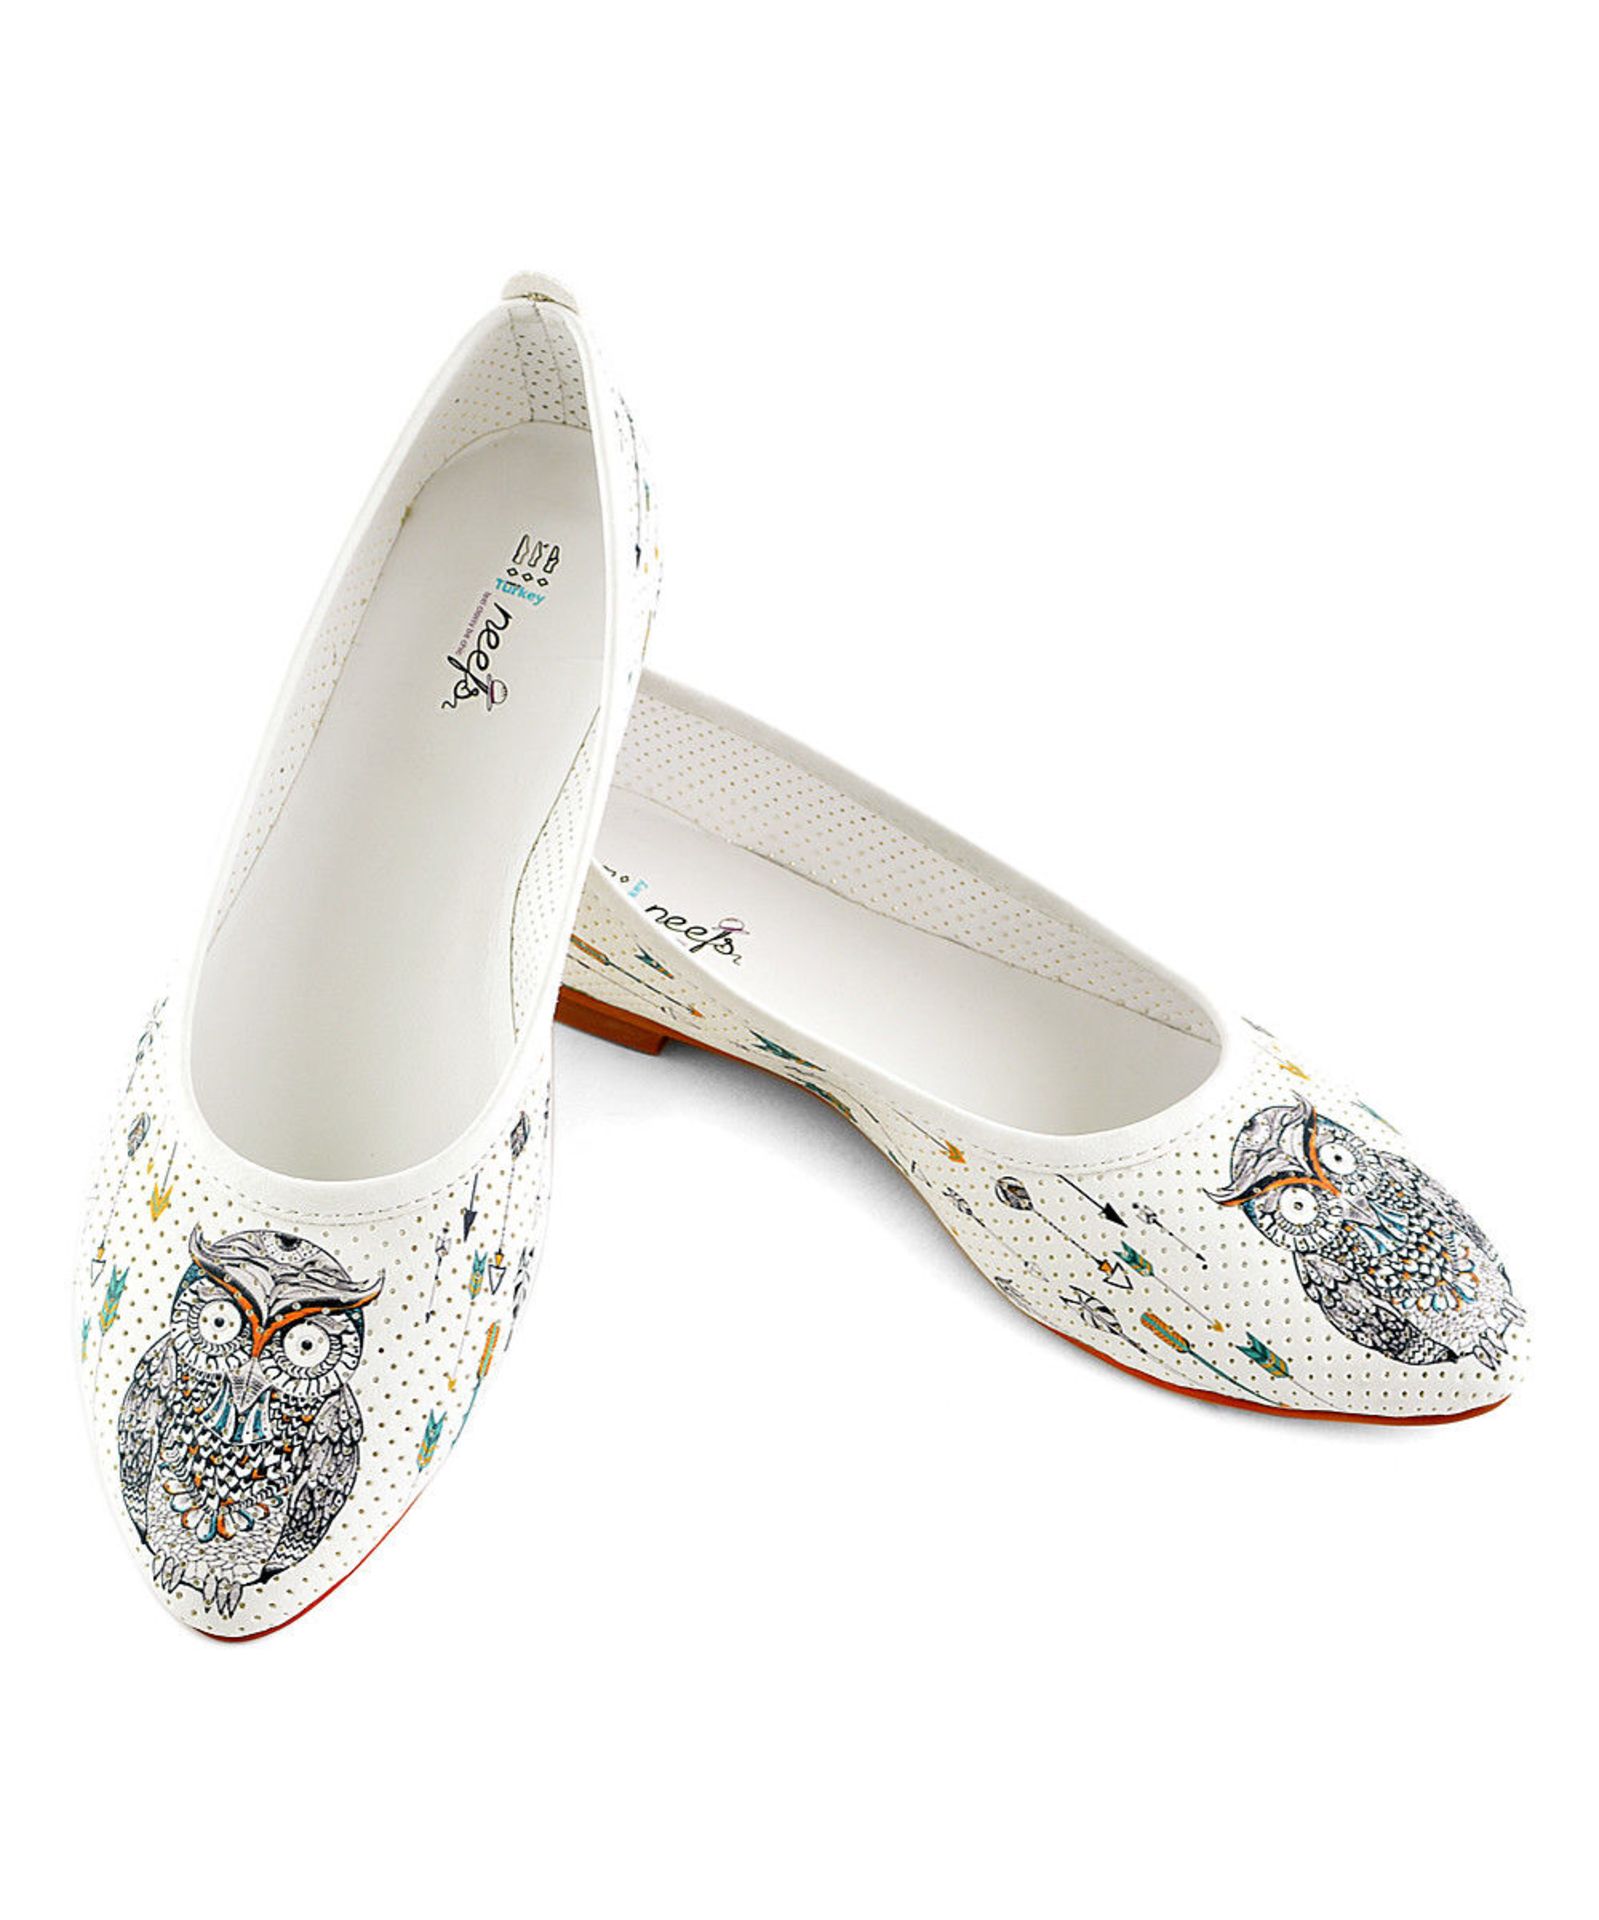 Neefs White & Black Owl Ballet Flat (Uk Size 7:Us Size 9) (New with box) [Ref: 48186820-H-001]